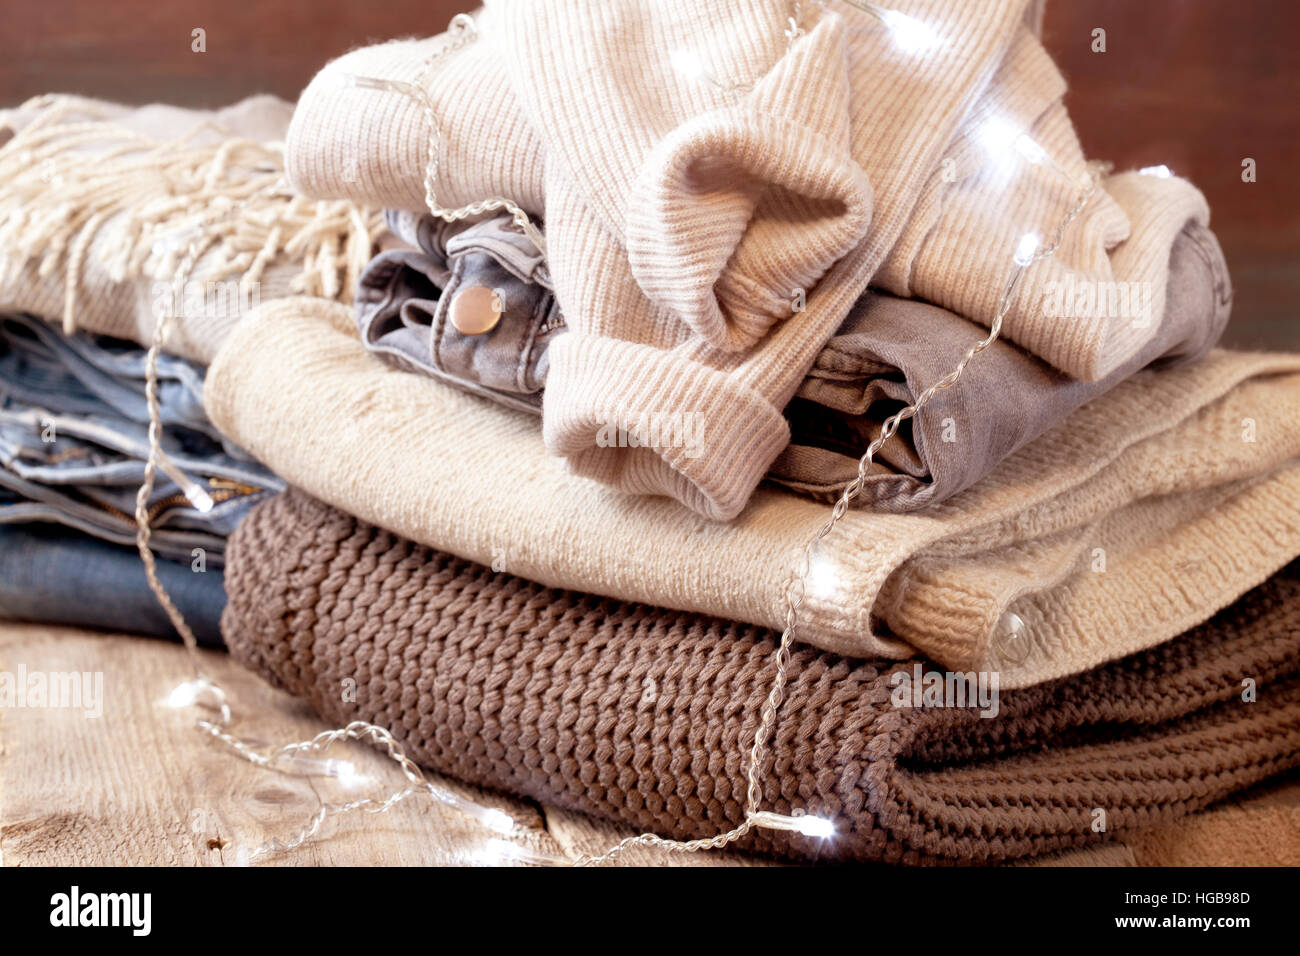 Stack of woolen clothes Stock Photo by ©belchonock 140263868